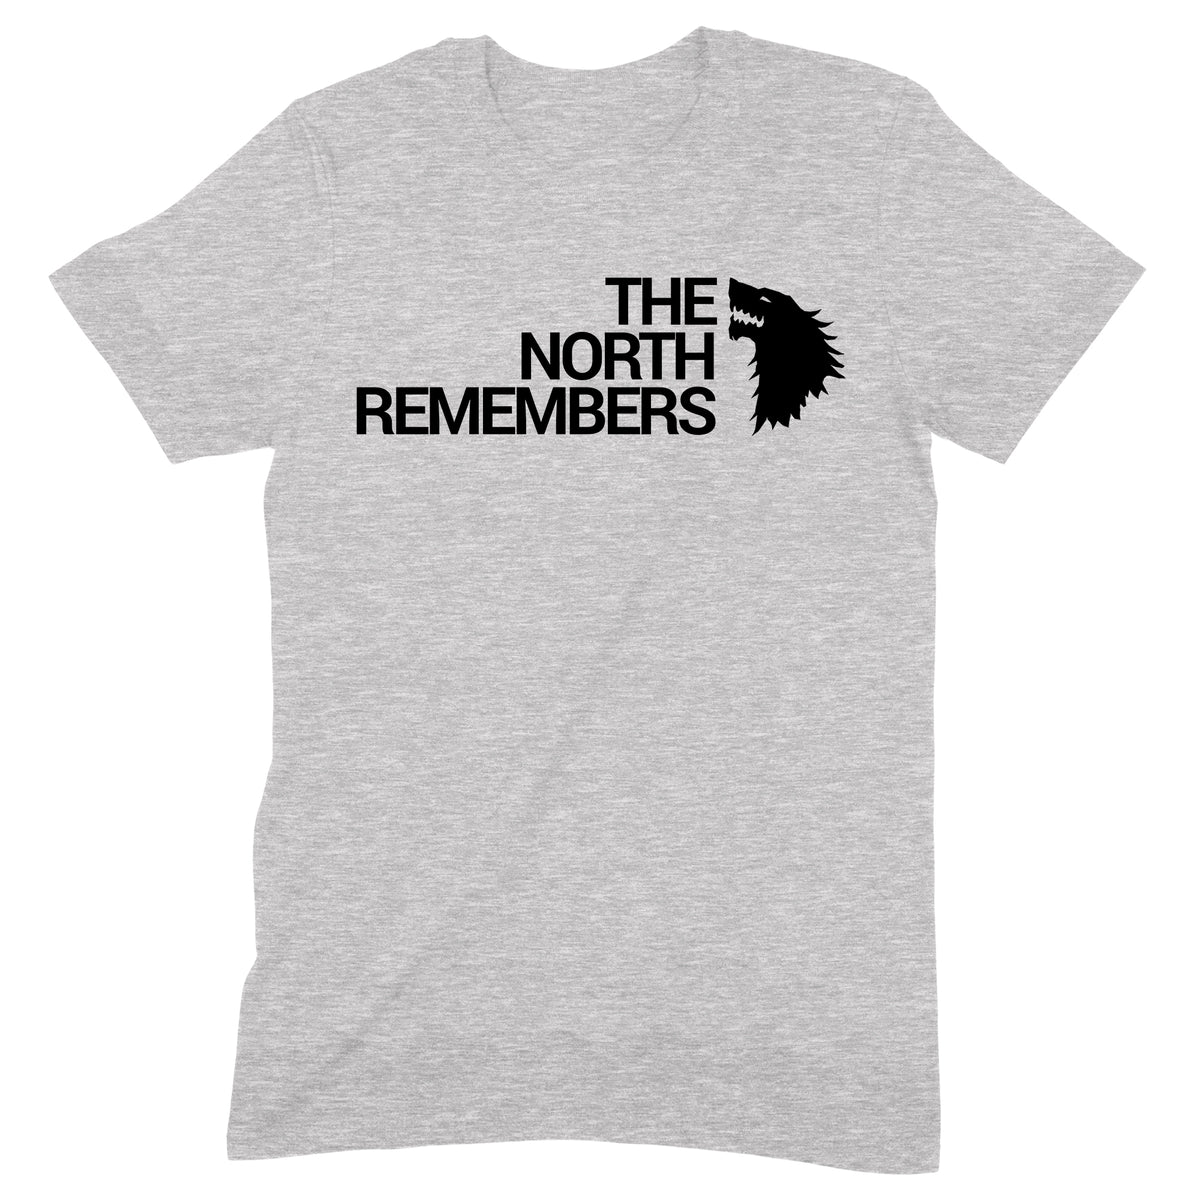 "The North Remembers" Premium Midweight Ringspun Cotton T-Shirt - Mens/Womens Fits